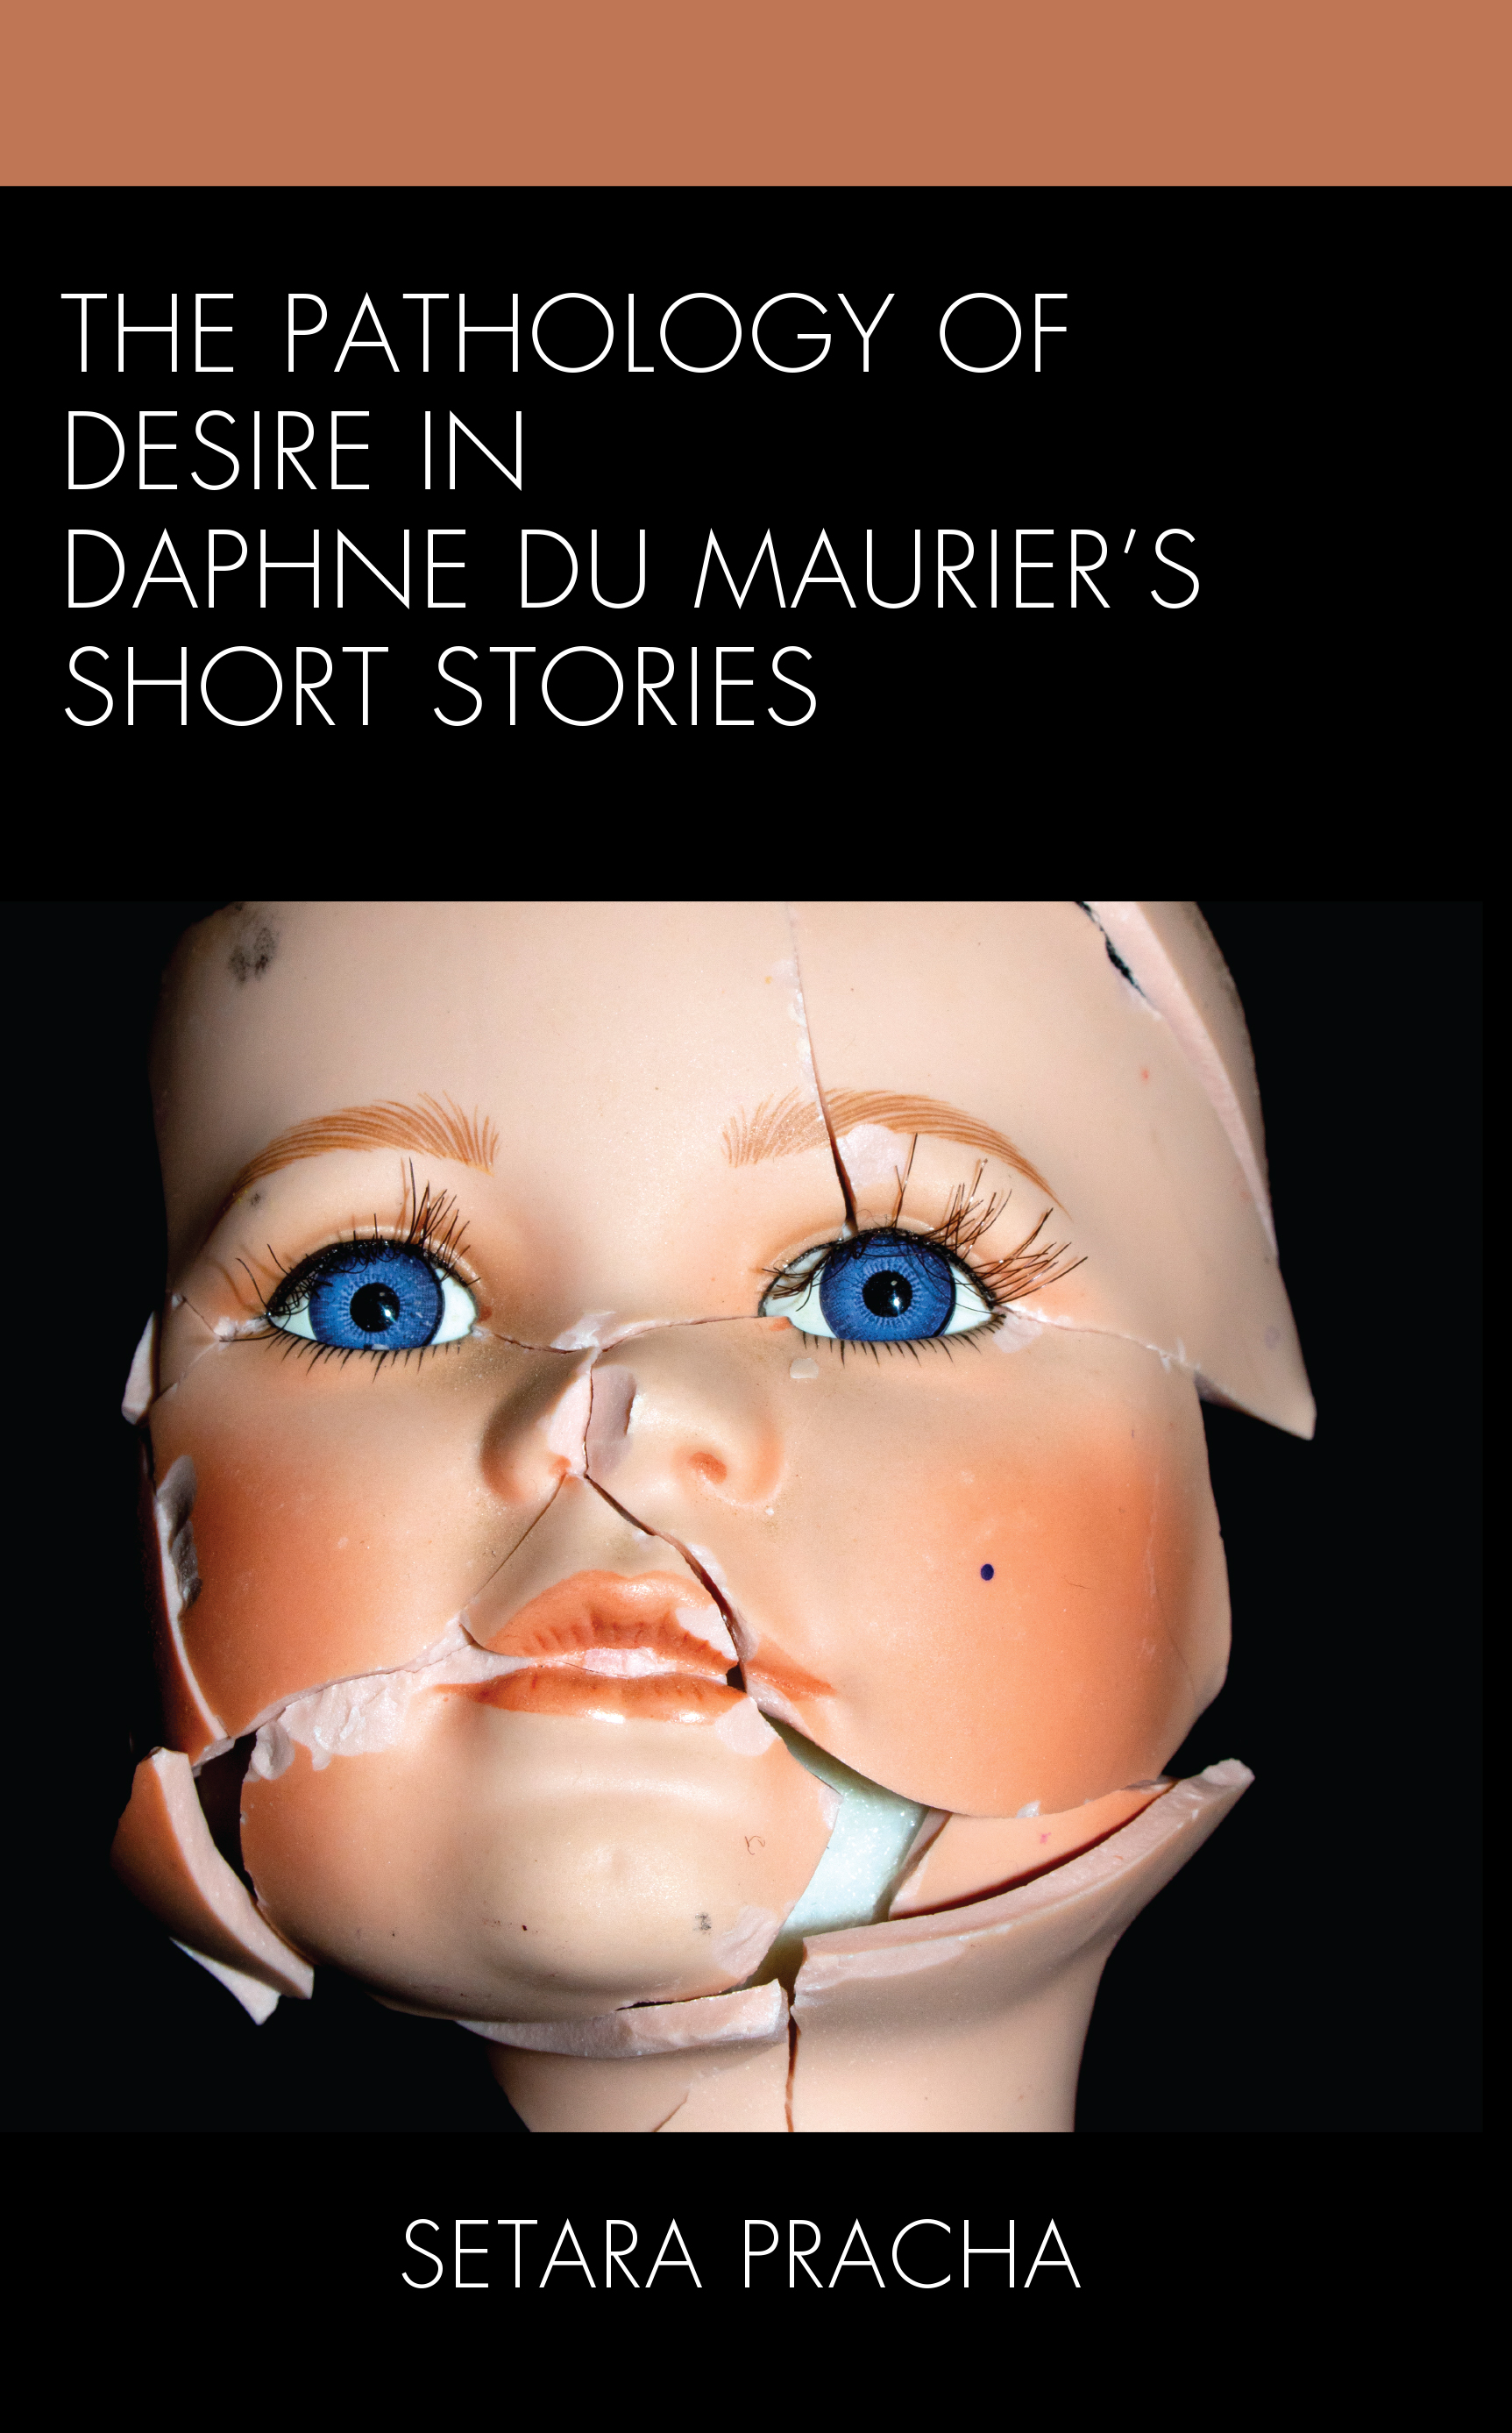 The Pathology of Desire in Daphne du Maurier’s Short Stories